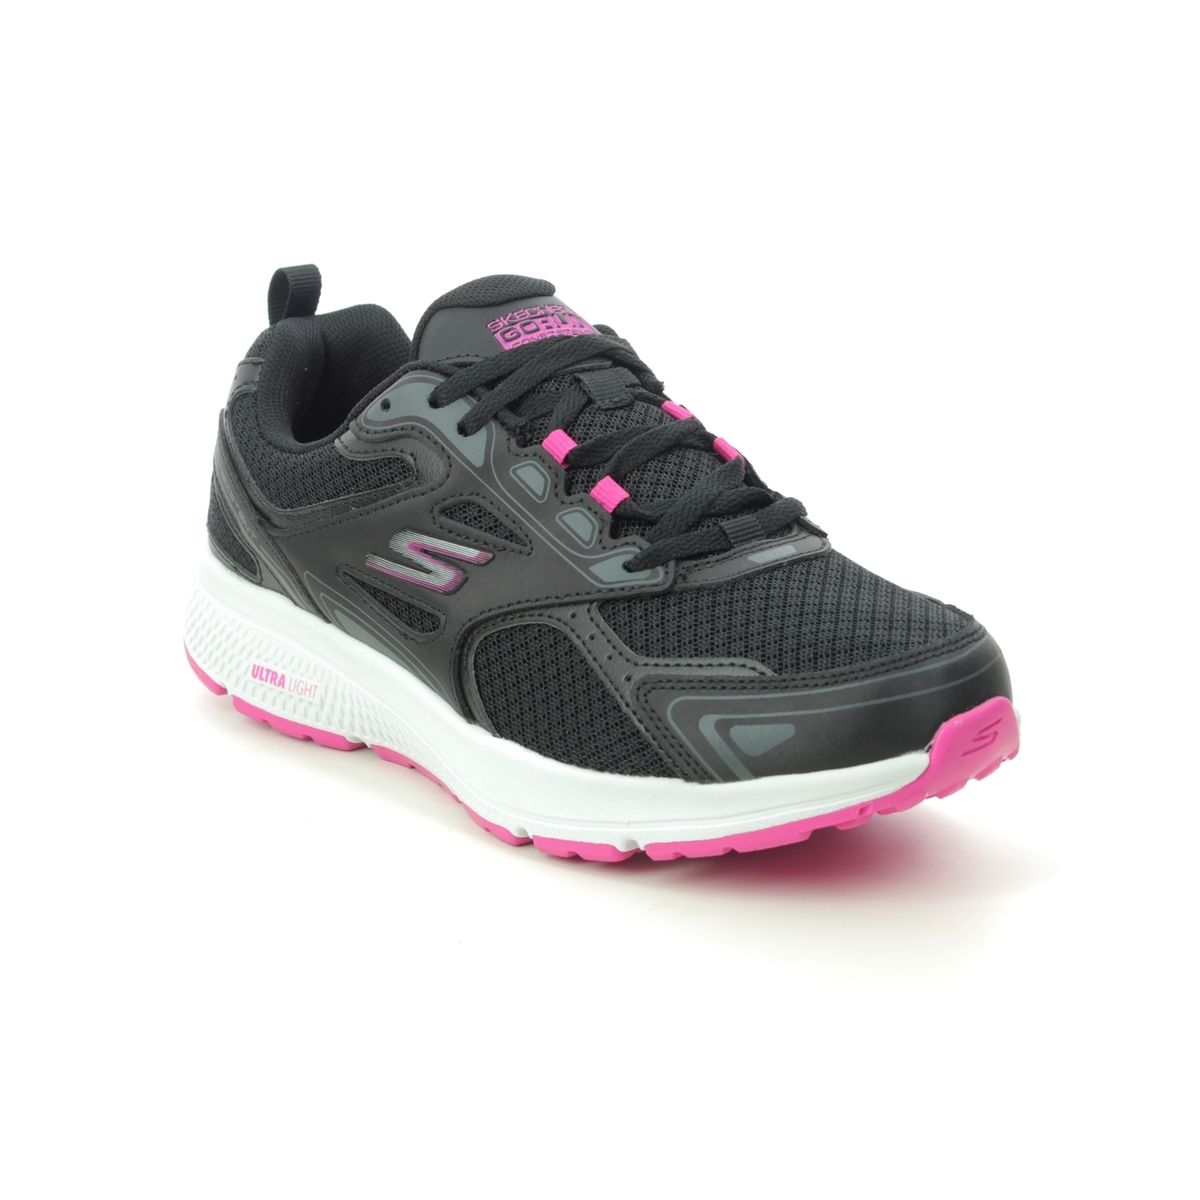 skechers black and pink shoes